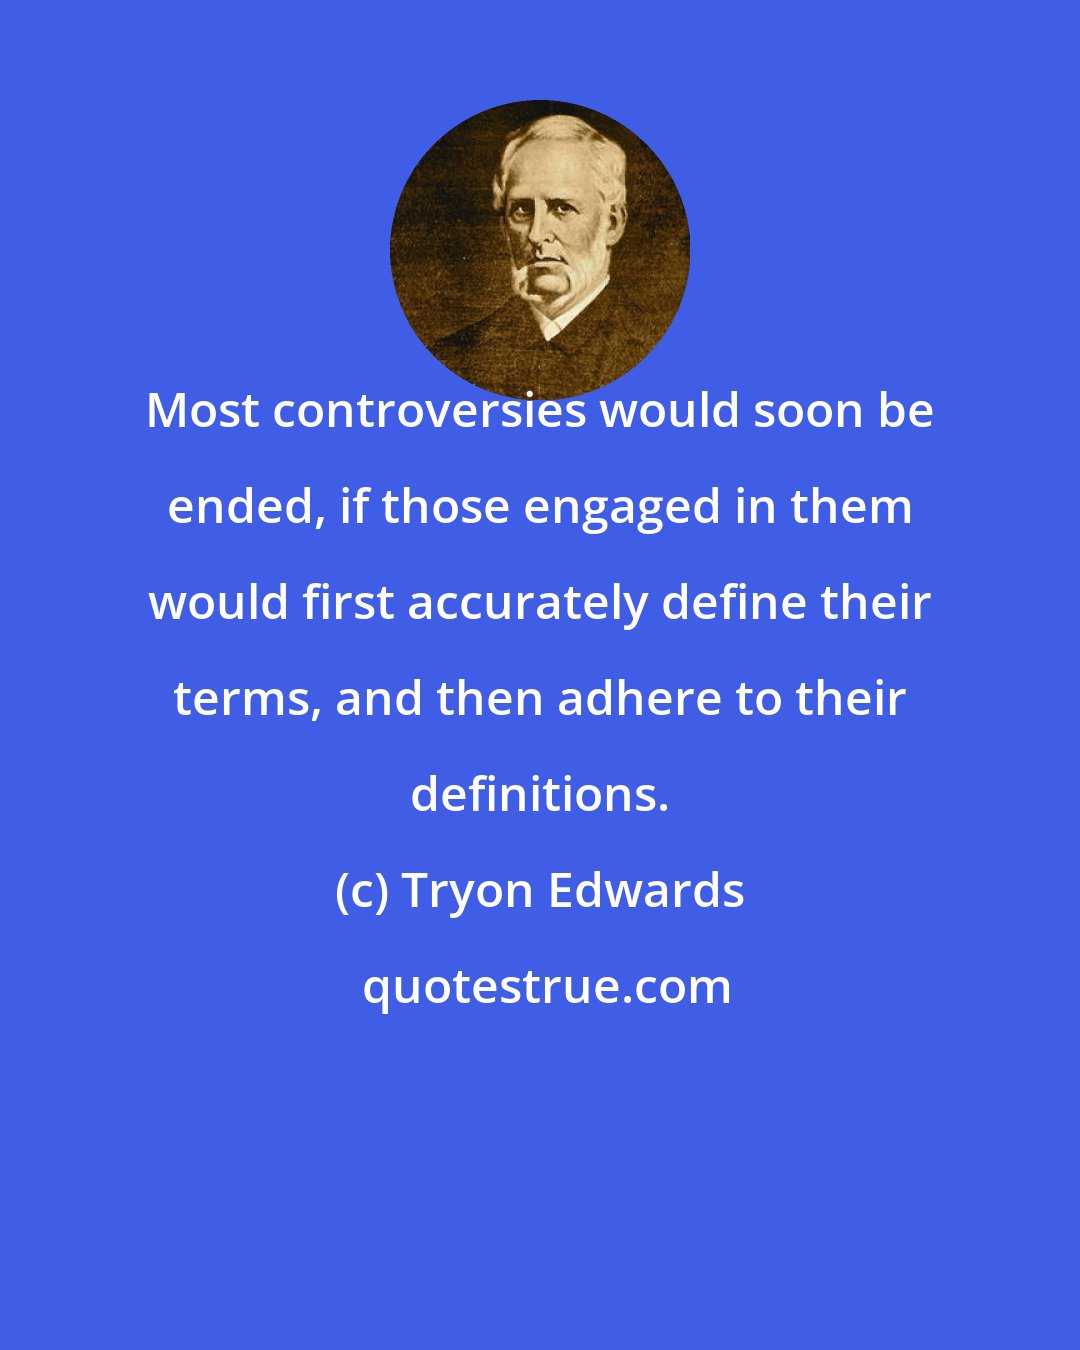 Tryon Edwards: Most controversies would soon be ended, if those engaged in them would first accurately define their terms, and then adhere to their definitions.